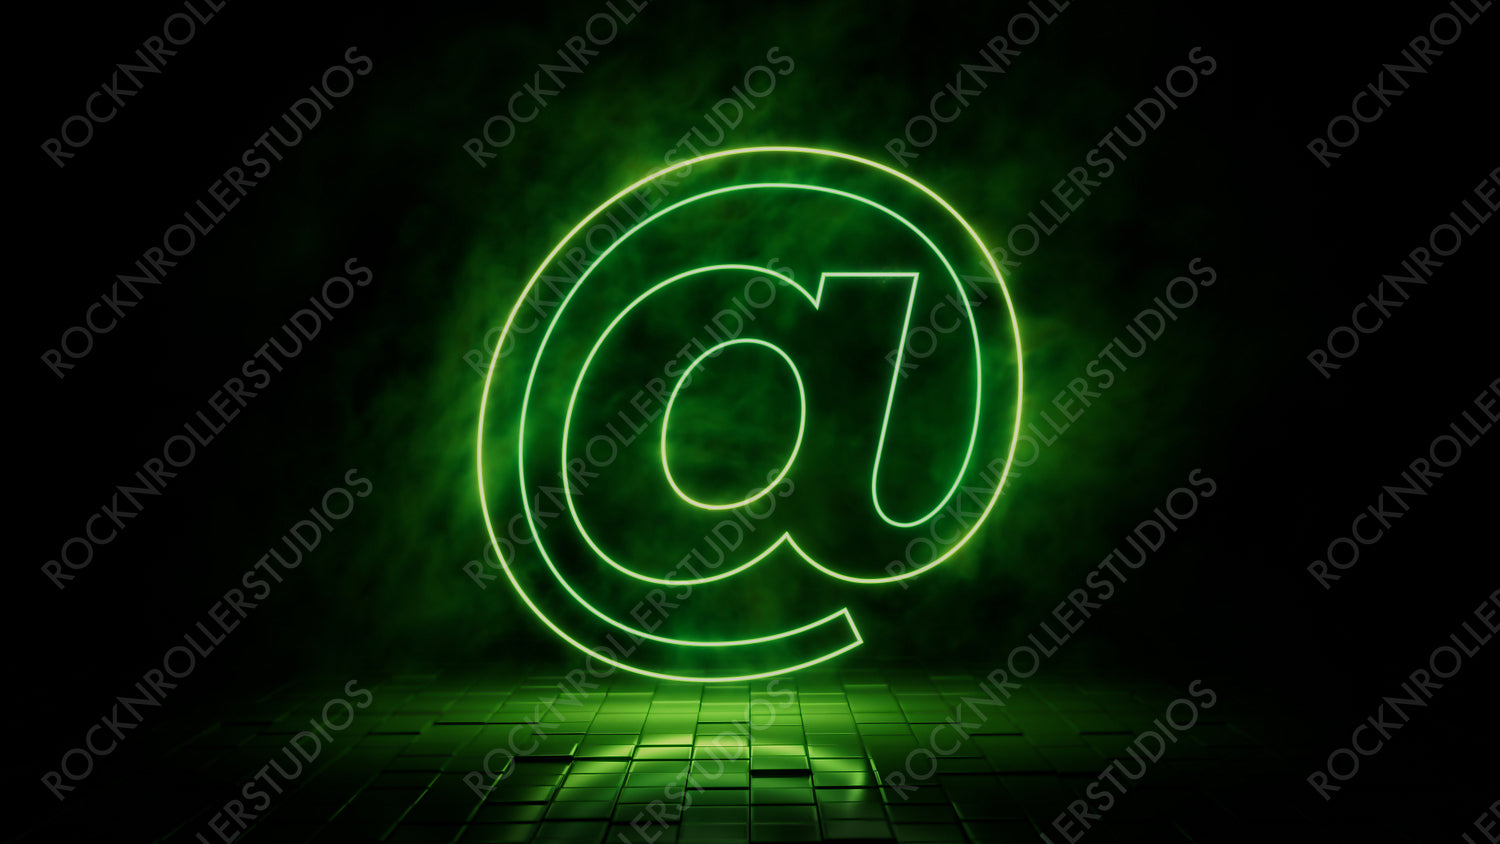 Green neon light @ icon. Vibrant colored technology symbol, isolated on a black background. 3D Render 